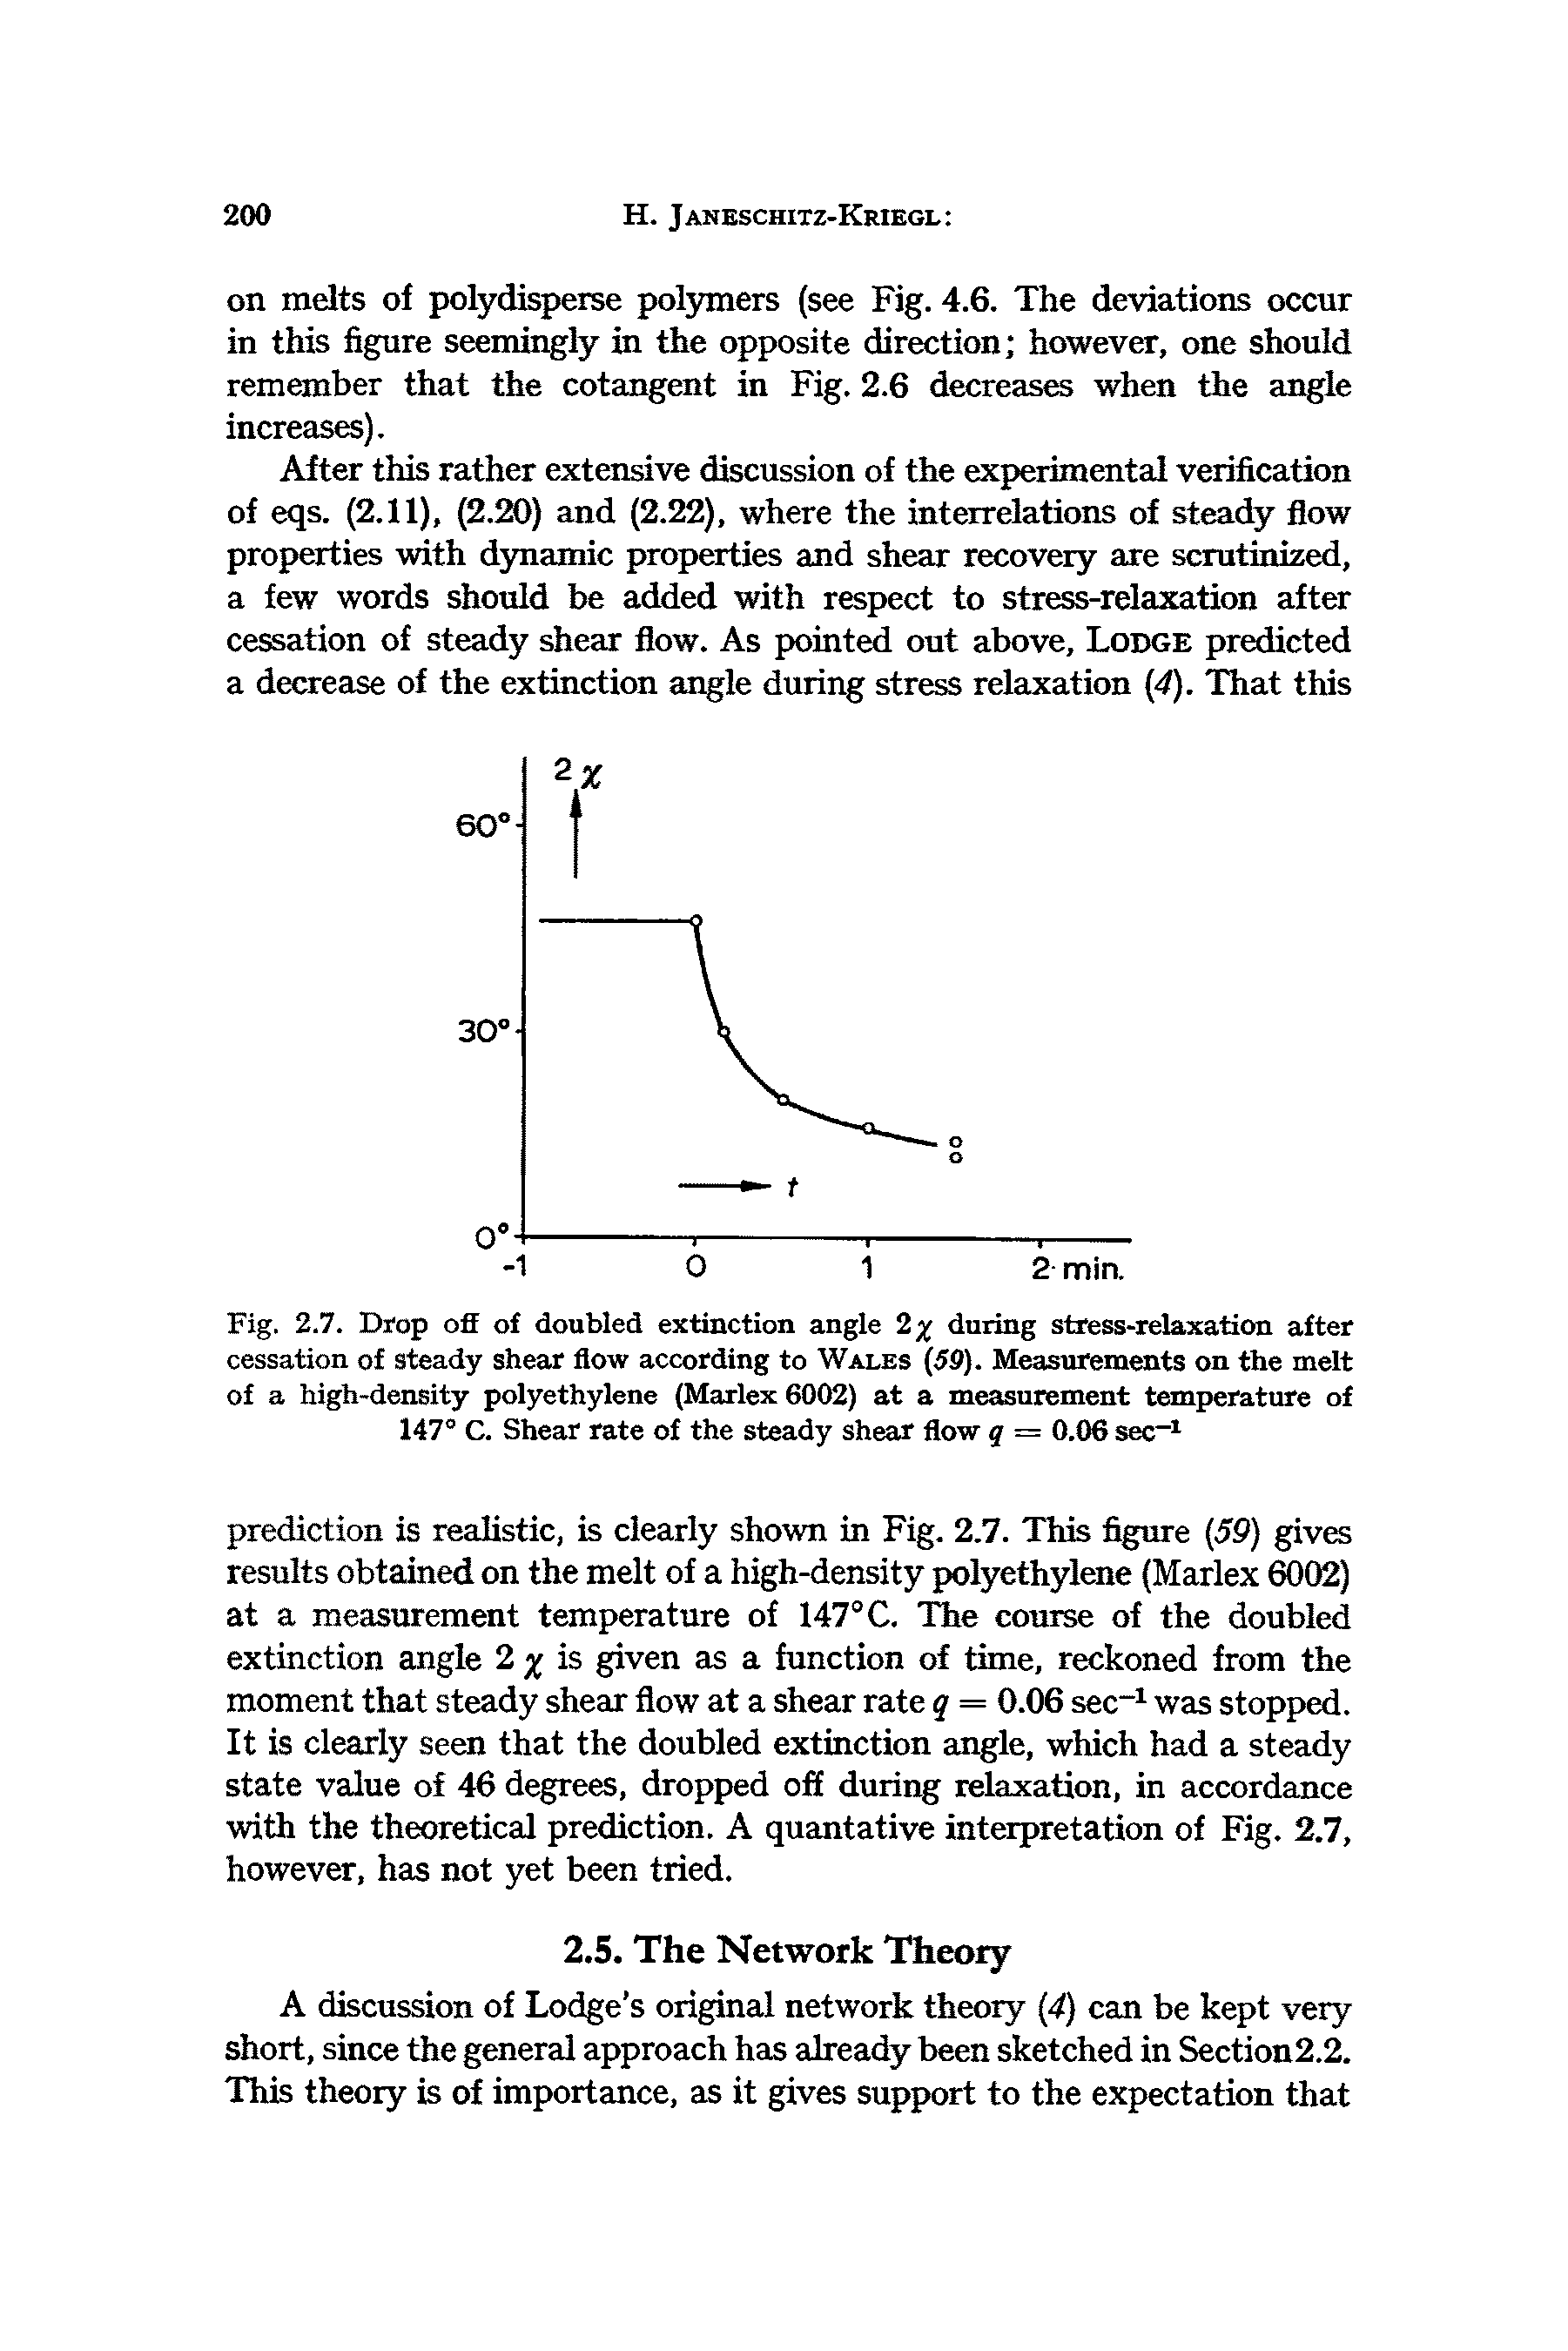 Fig. 2.7. Drop off of doubled extinction angle 2"/ during stress-relaxation after cessation of steady shear flow according to Wales (59). Measurements on the melt of a high-density polyethylene (Marlex 6002) at a measurement temperature of 147° C. Shear rate of the steady shear flow q = 0.06 sec-1...